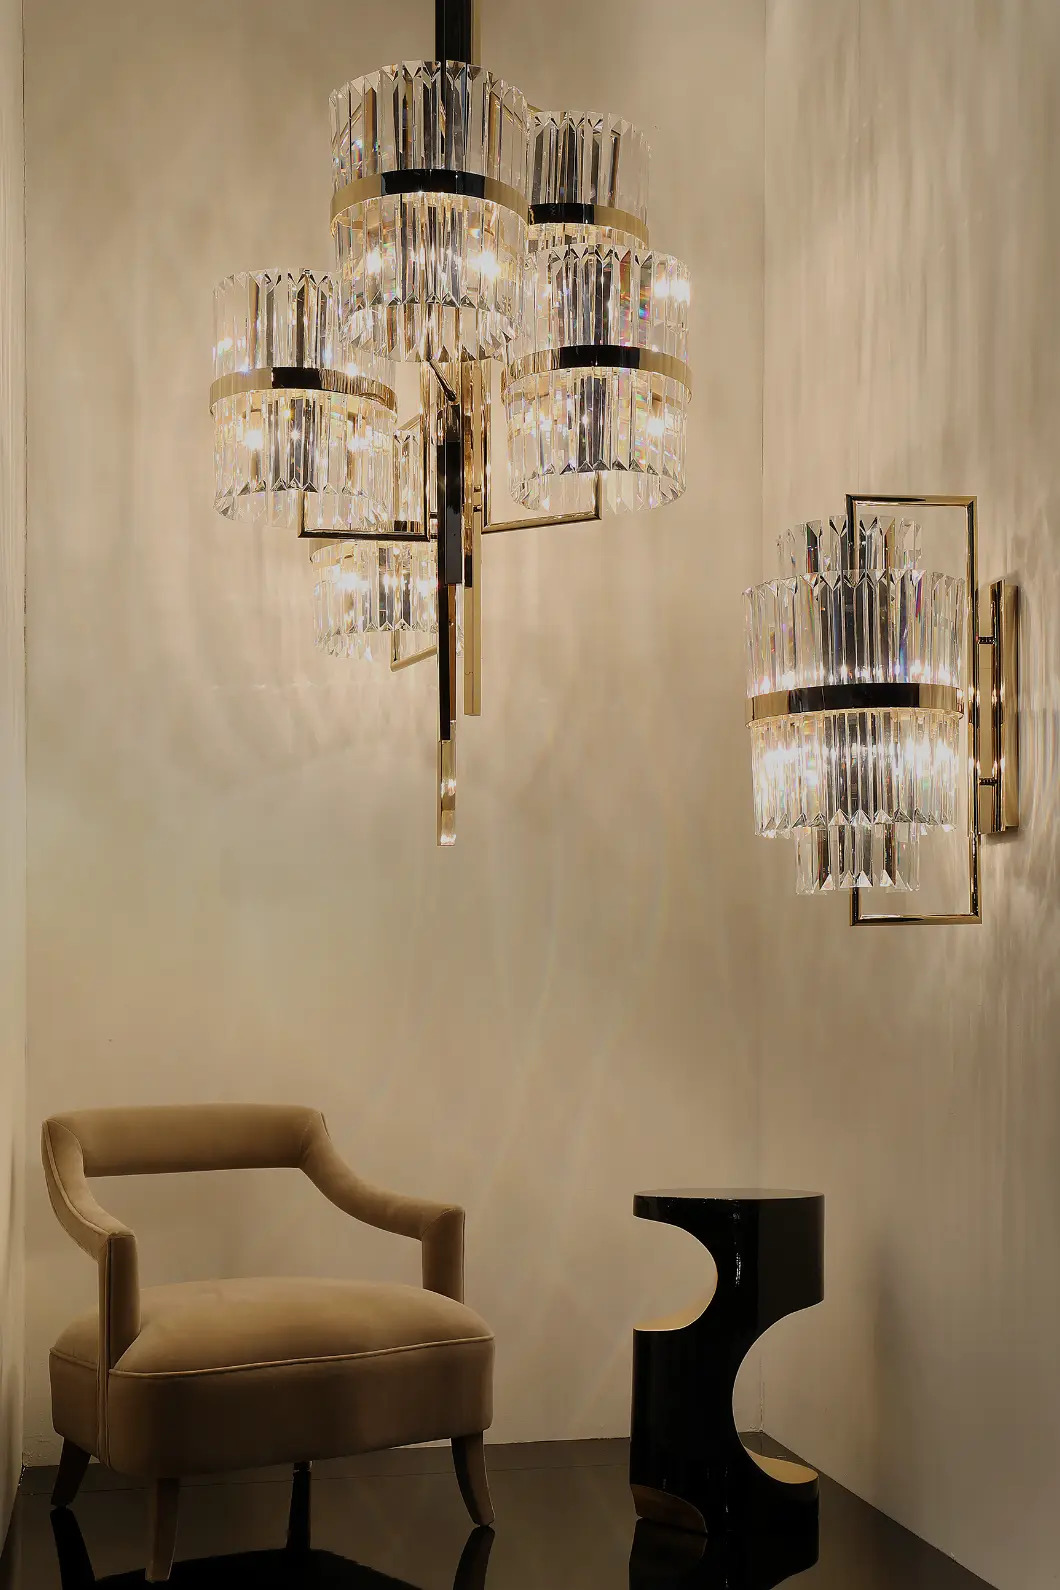 Dramatic Chandeliers With Intricate And Lush Designs!